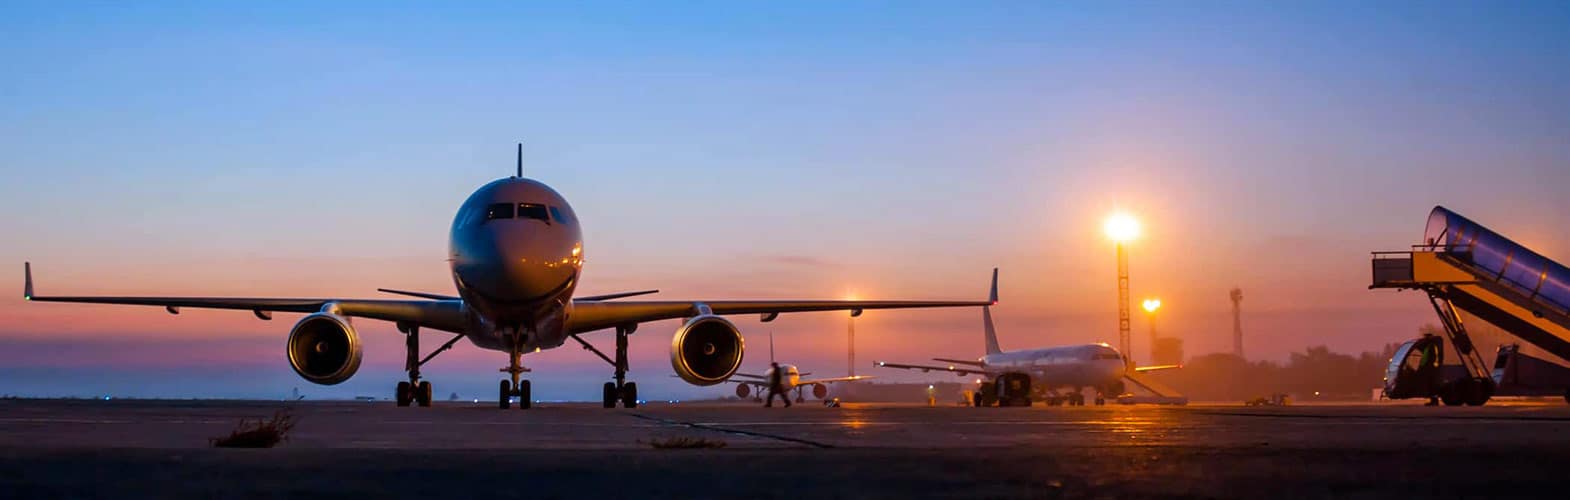 An airplane sitting on a runway at sunset.